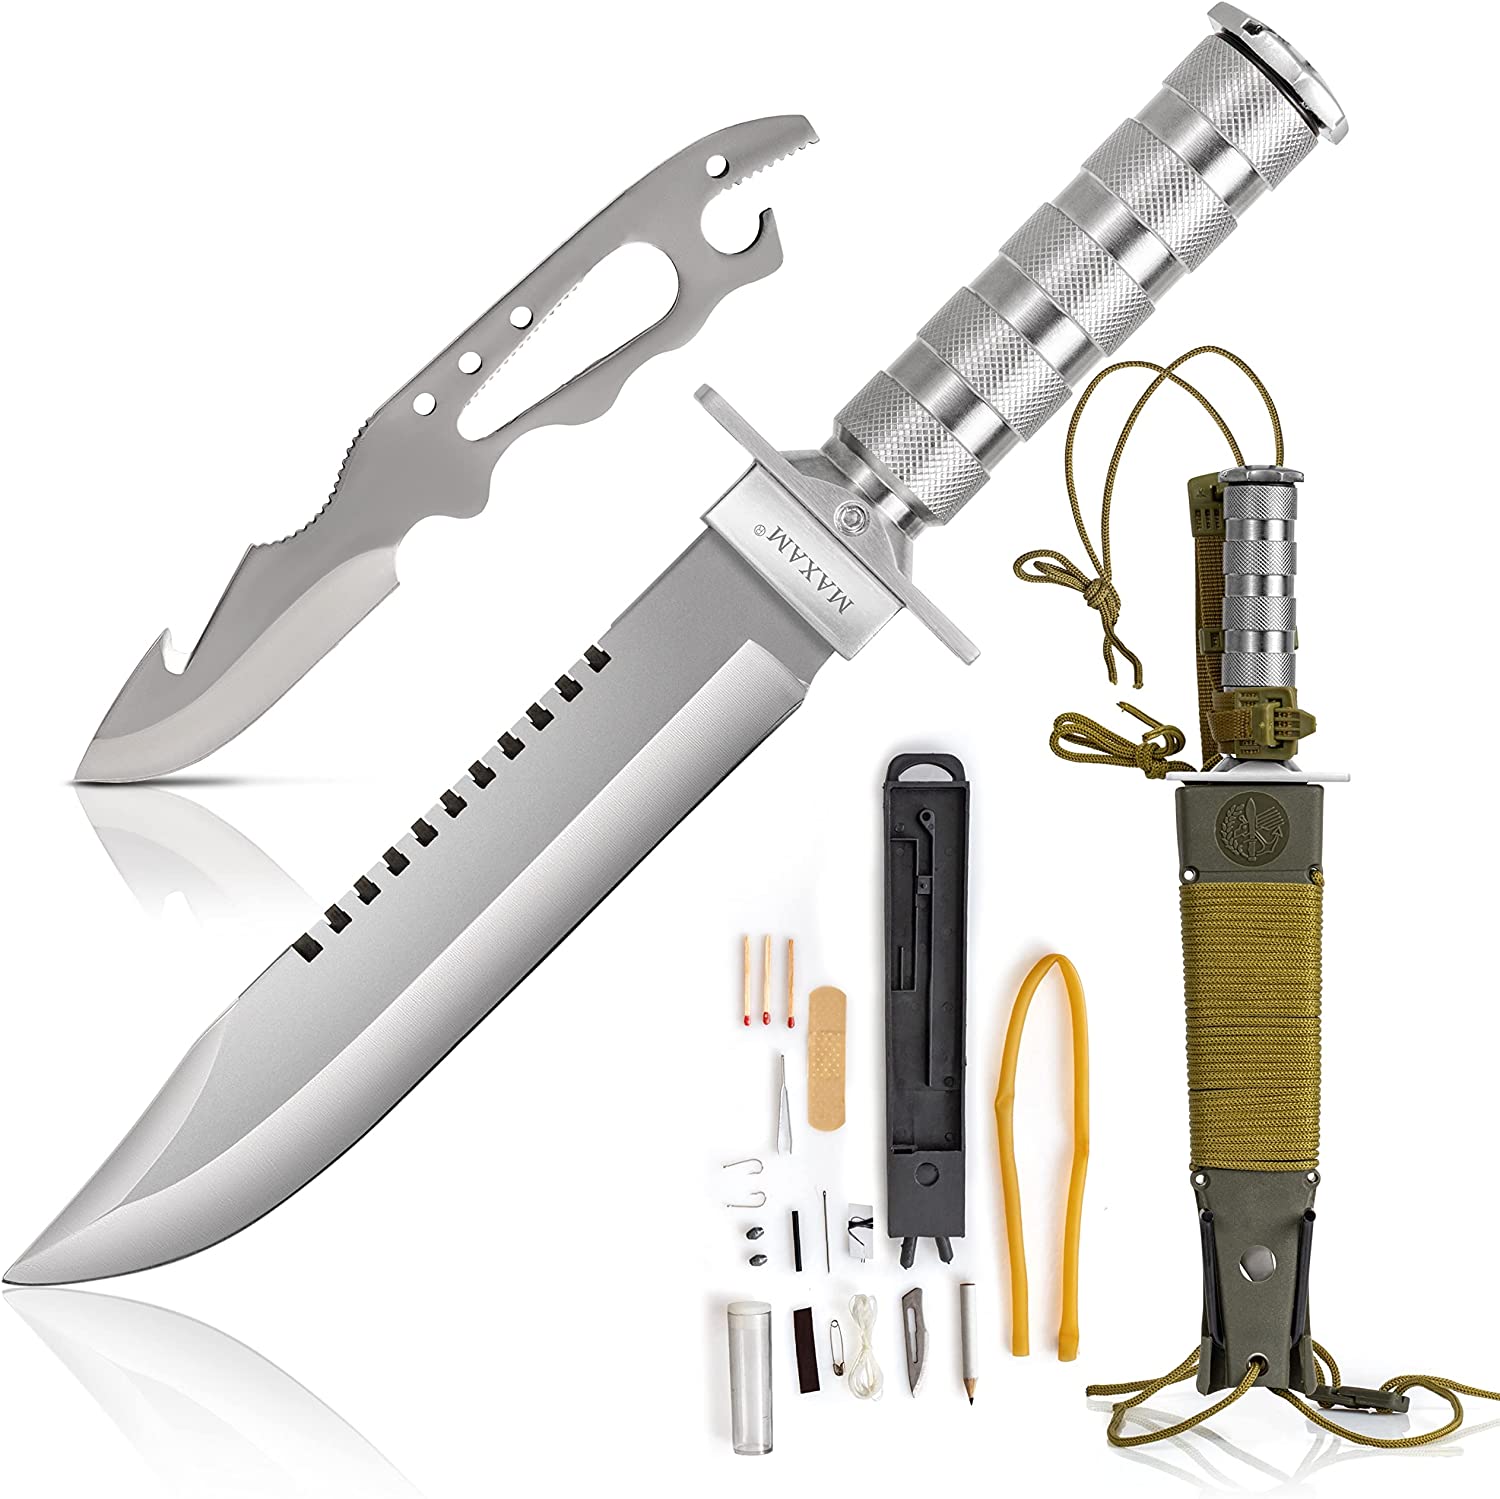 Maxam 12-Piece Survival Knife Set with Zinc Alloy Handles, Ideal for Survivalists, Hunters, Hikers, and Outdoor Sports Enthusiasts